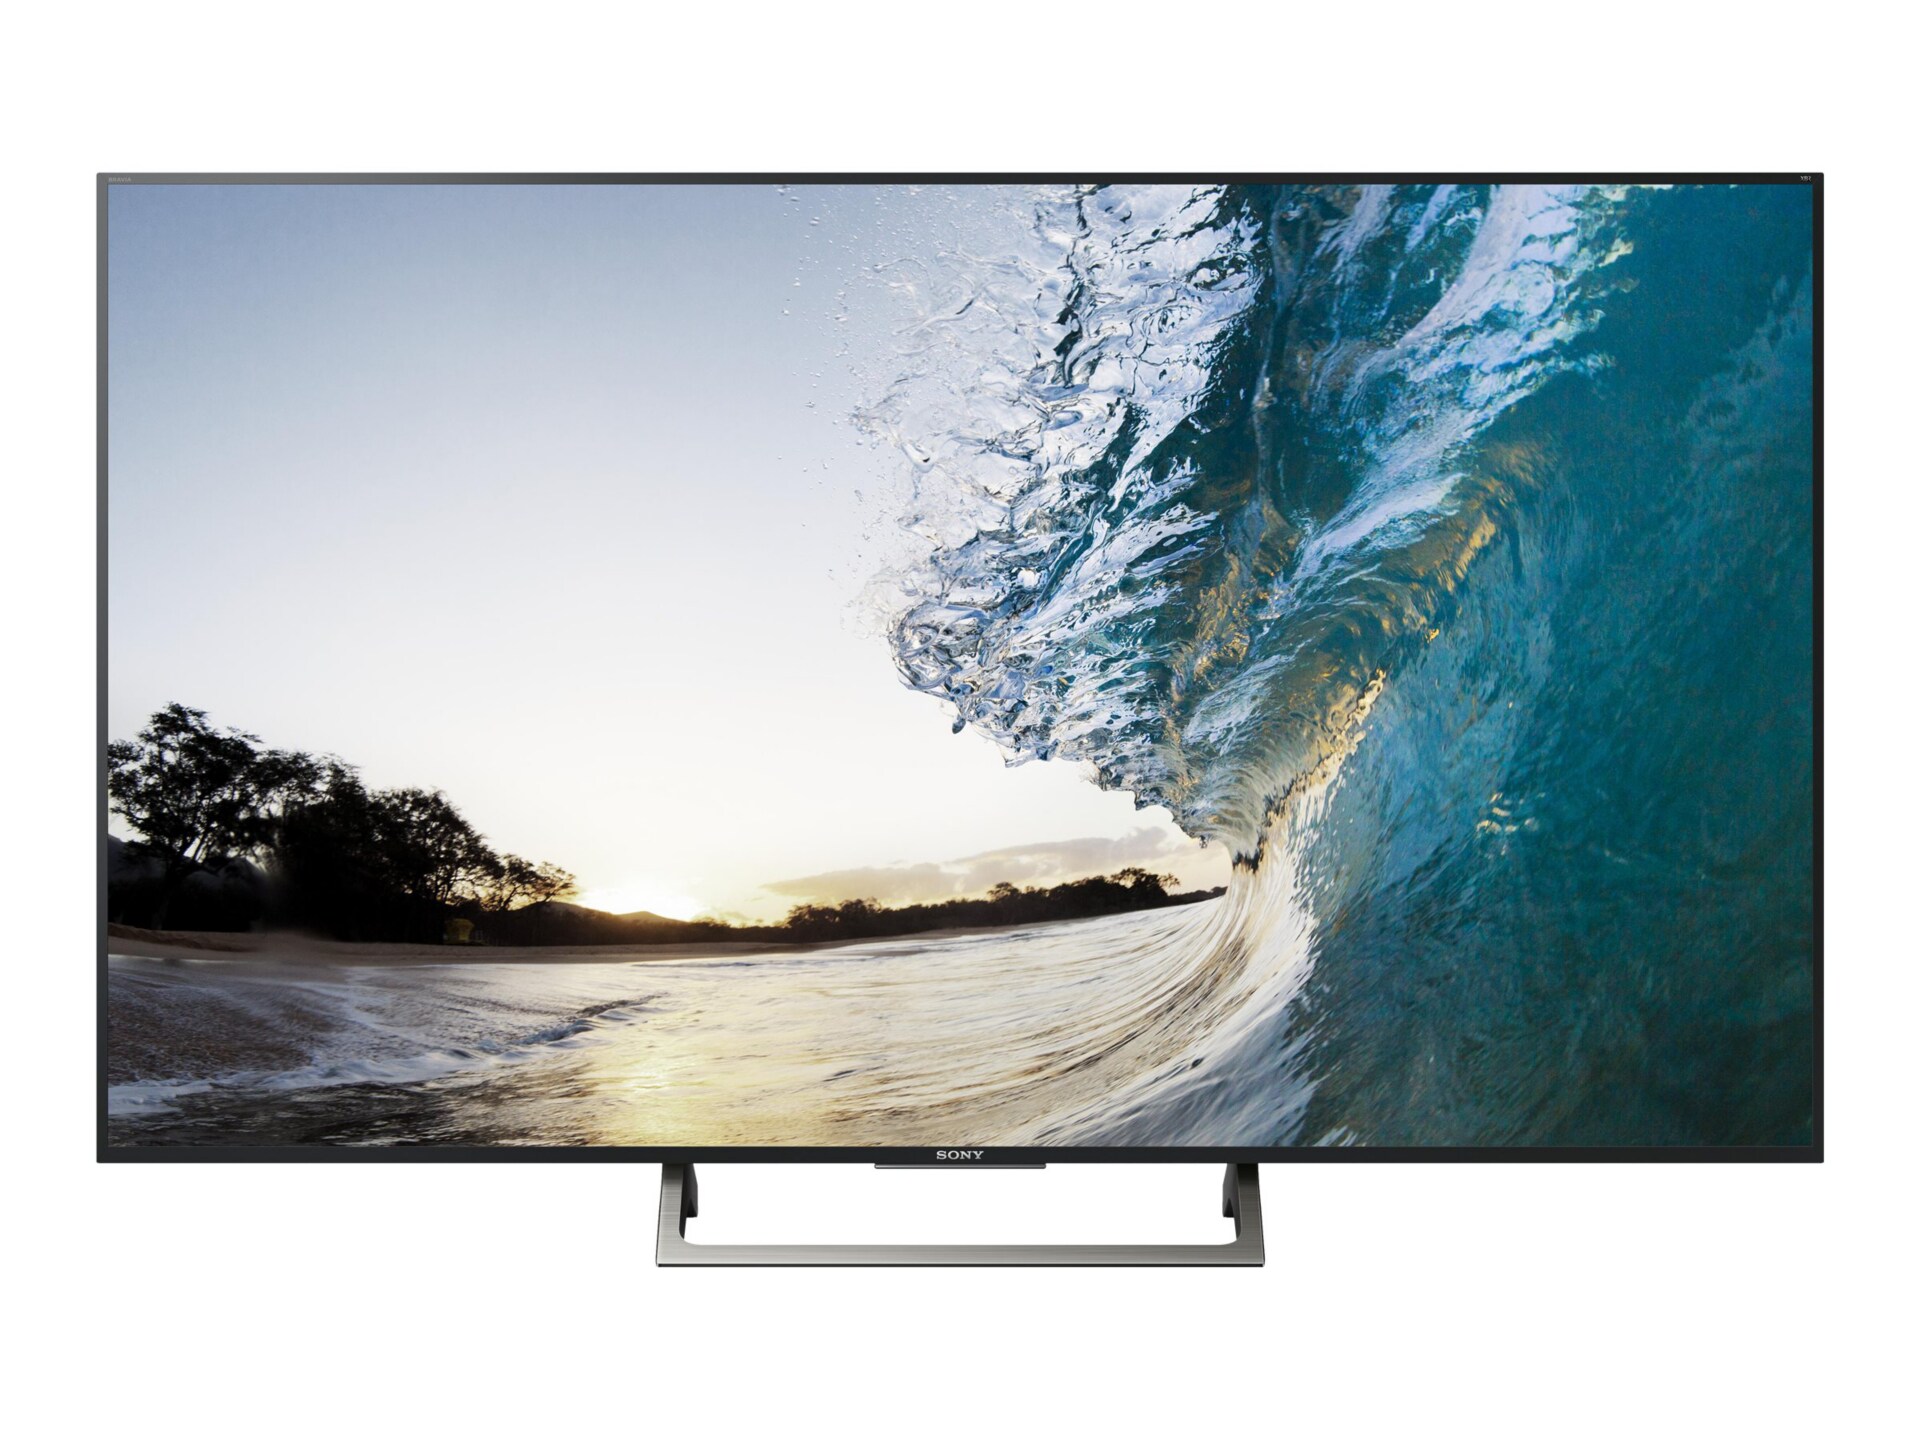 Sony FWD-65X850E BRAVIA Pro - 65" Class (64.5" viewable) LED display